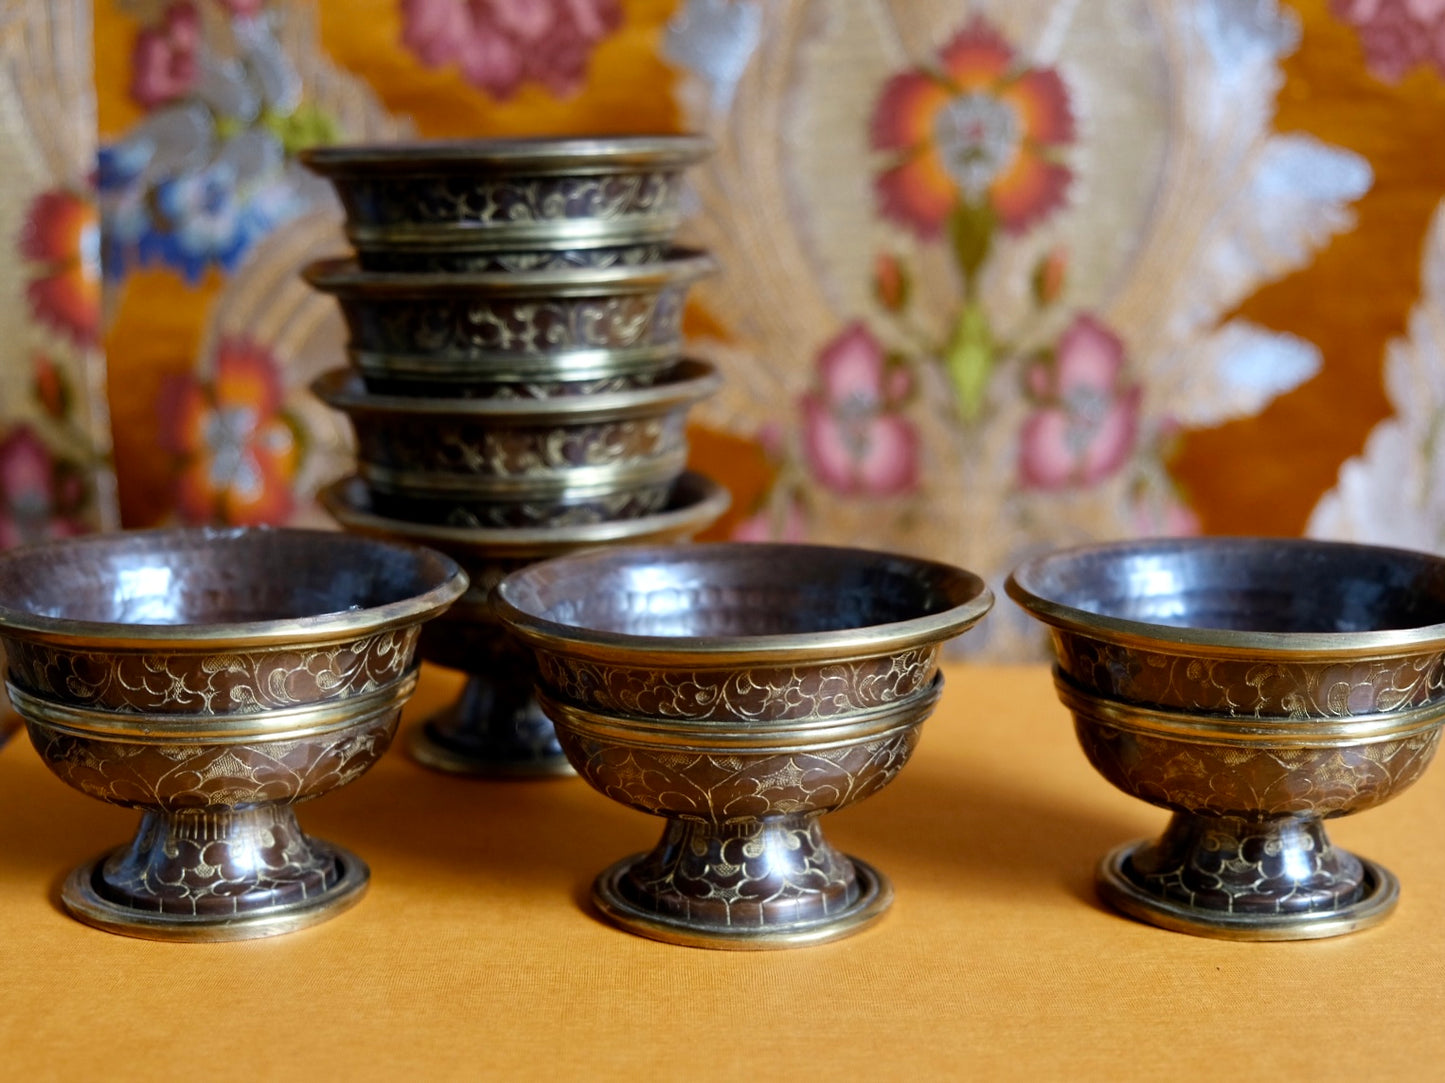 Set of 7 copper bowls with stand at altar.